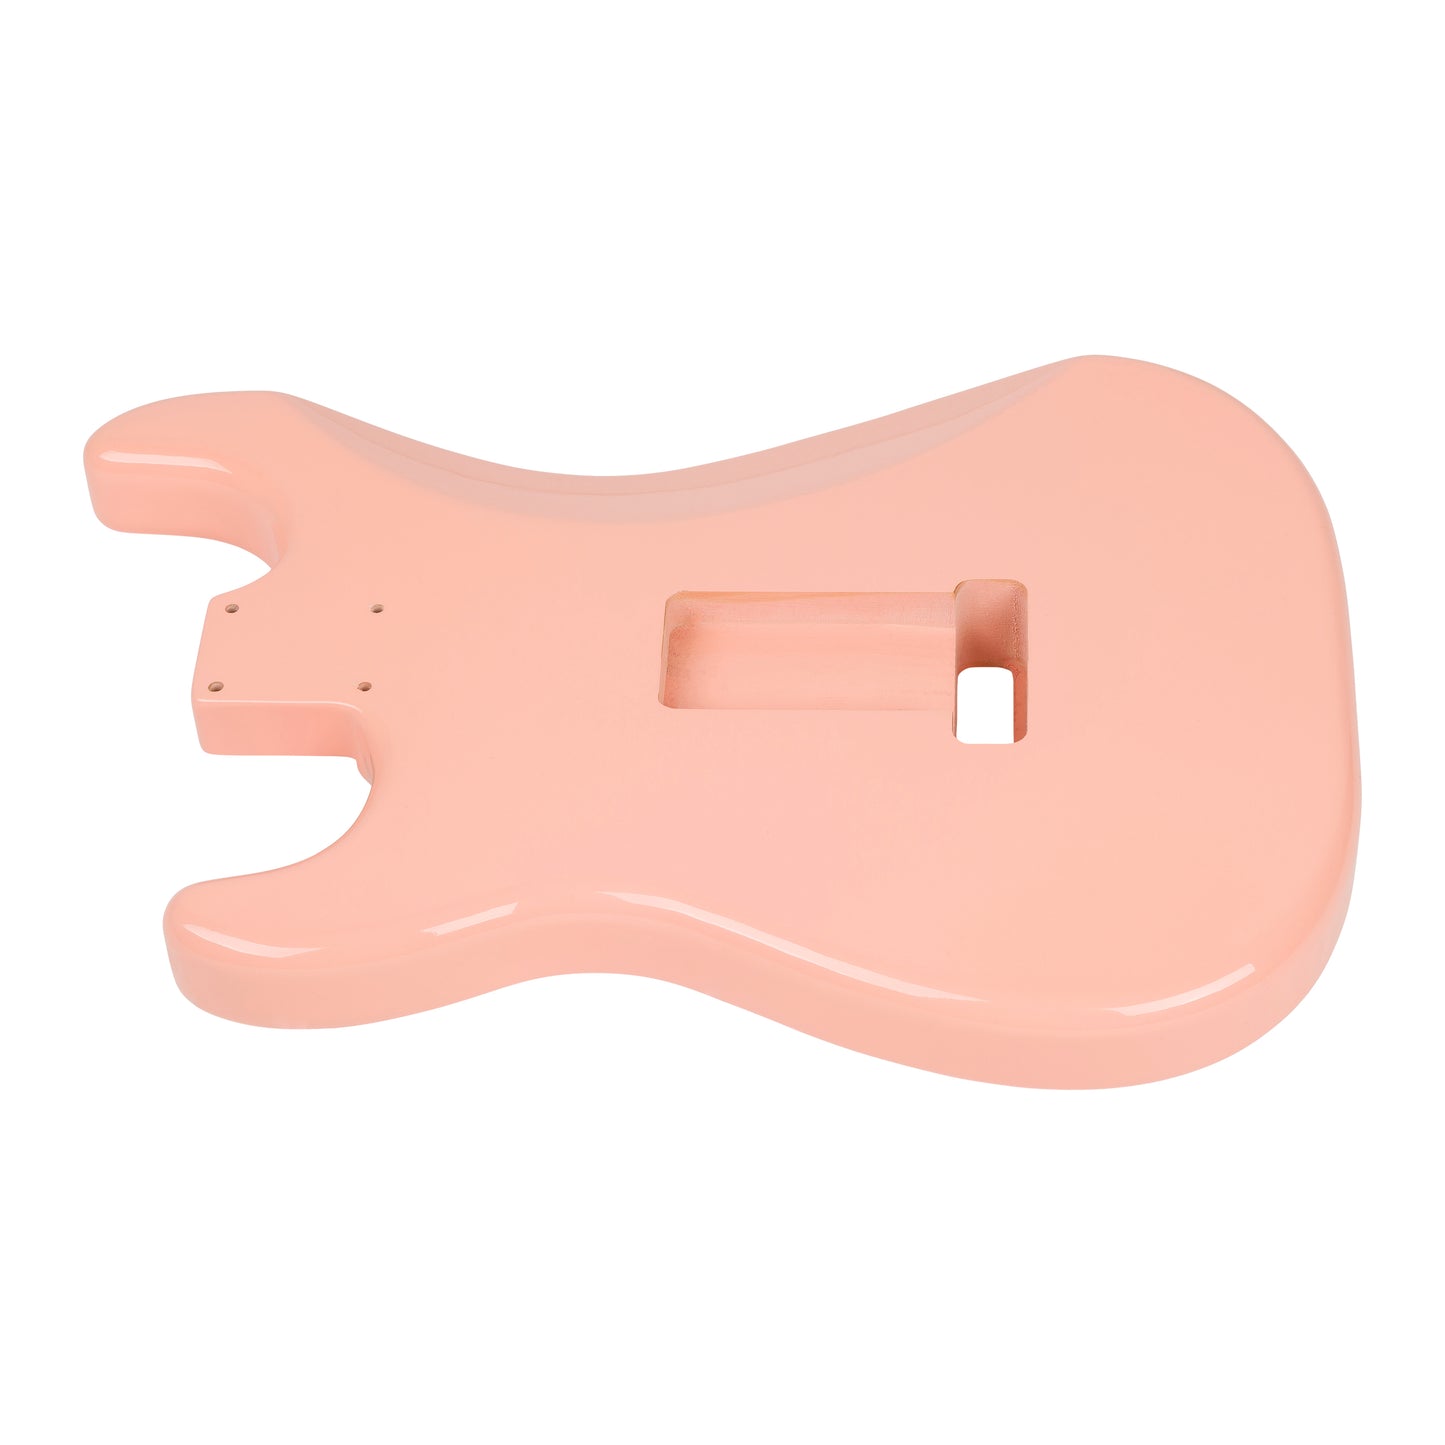 AE Guitars® S-Style Alder Replacement Guitar Body Shell Pink Nitro